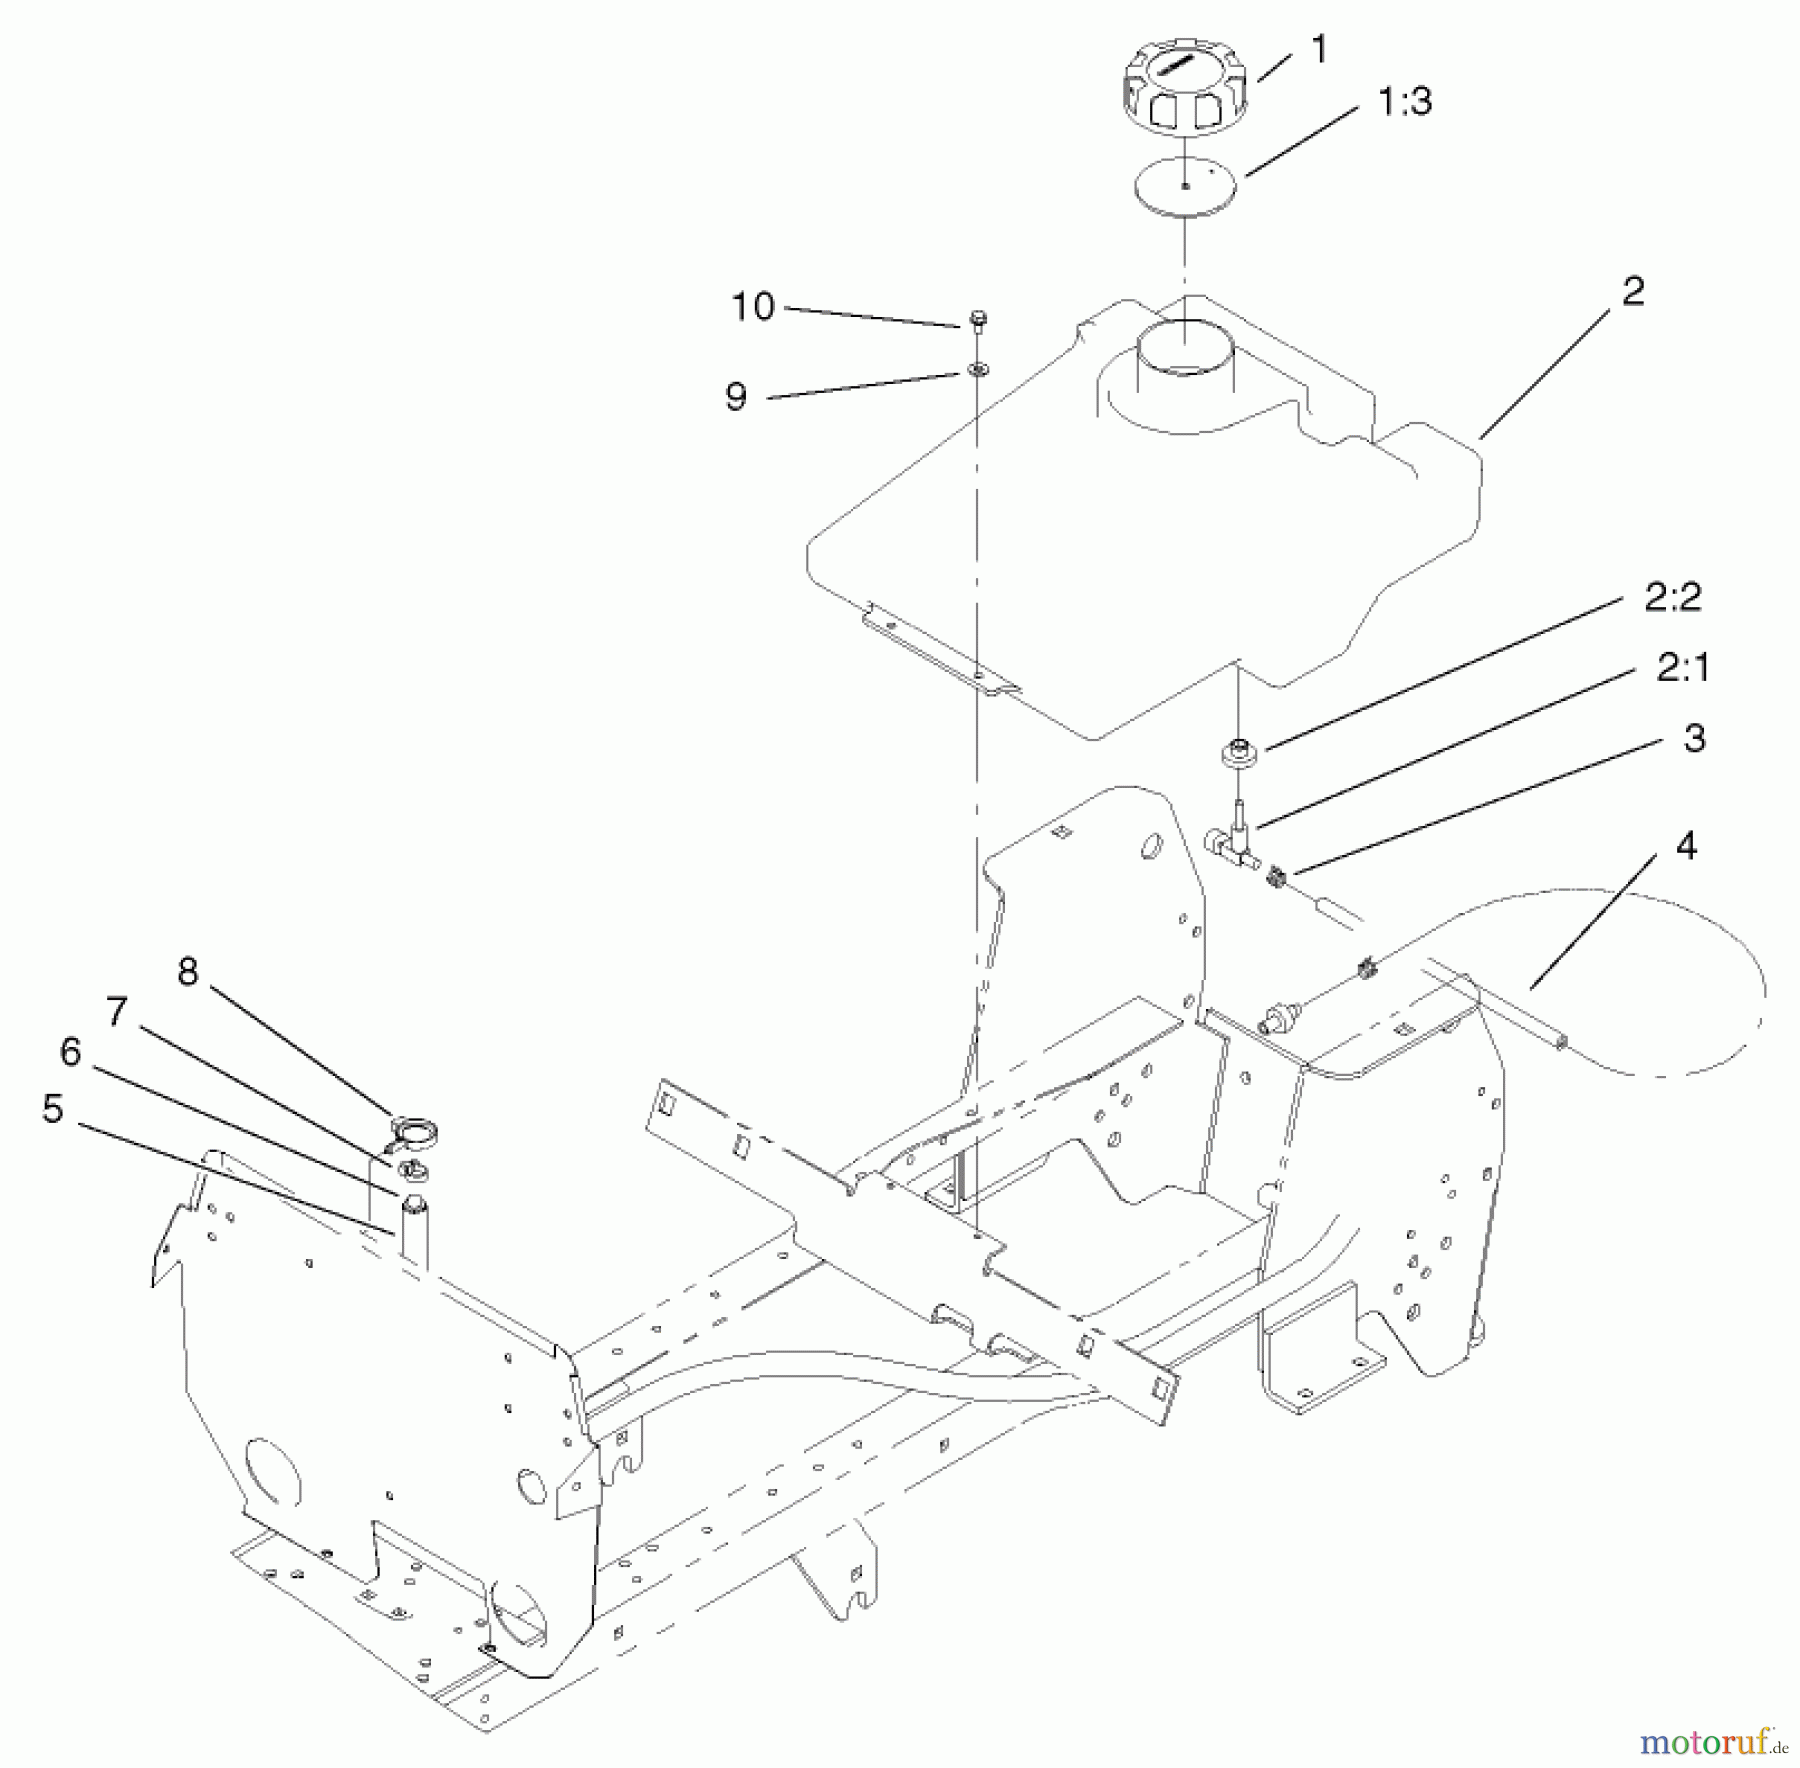  Toro Neu Mowers, Lawn & Garden Tractor Seite 1 72087 (268-H) - Toro 268-H Lawn and Garden Tractor, 2001 (210000001-210999999) FUEL TANK ASSEMBLY